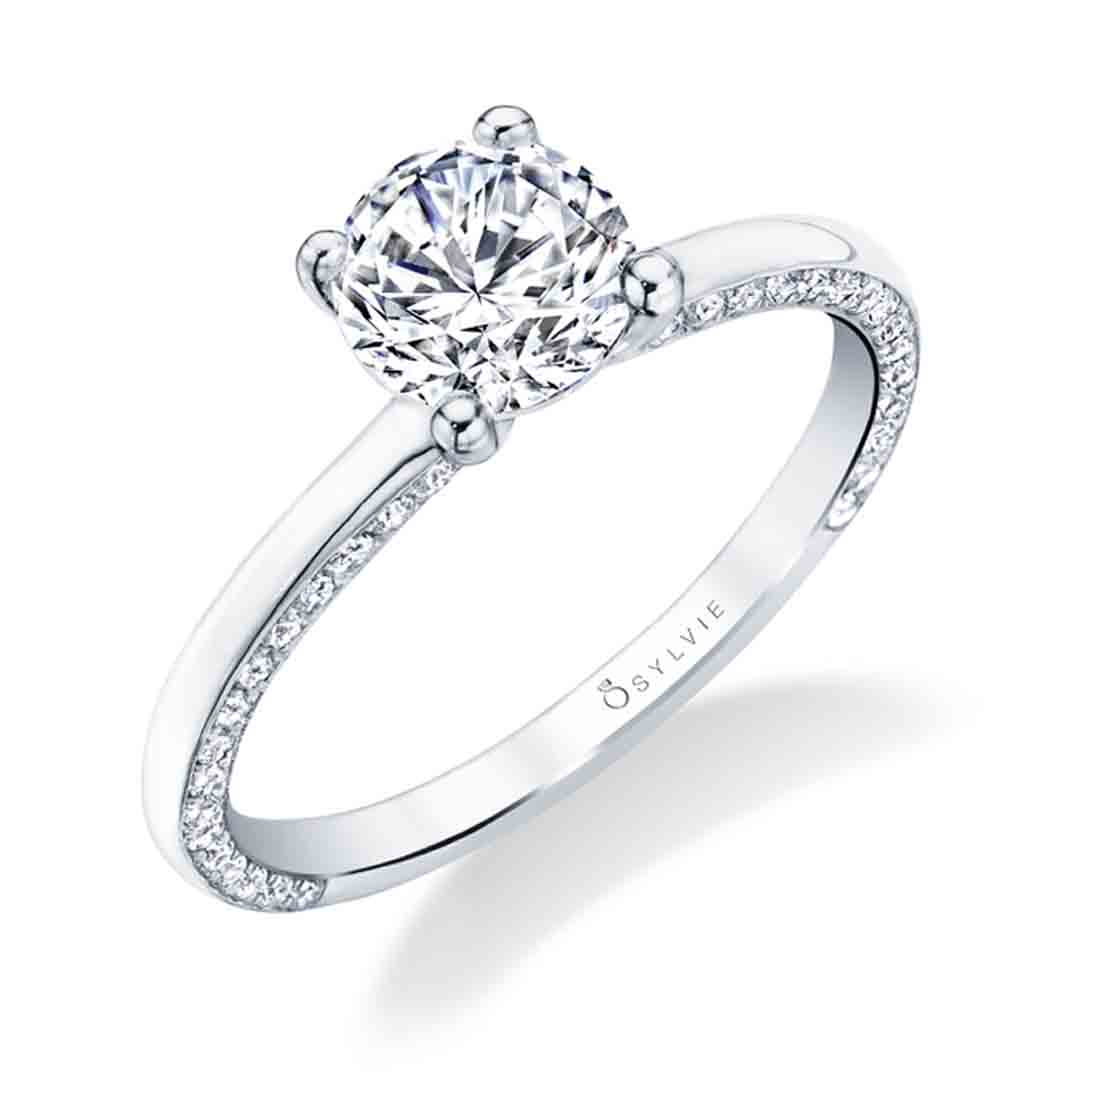 Modern Solitaire Engagement Ring - Messaline SVS Fine Jewelry Oceanside, NY